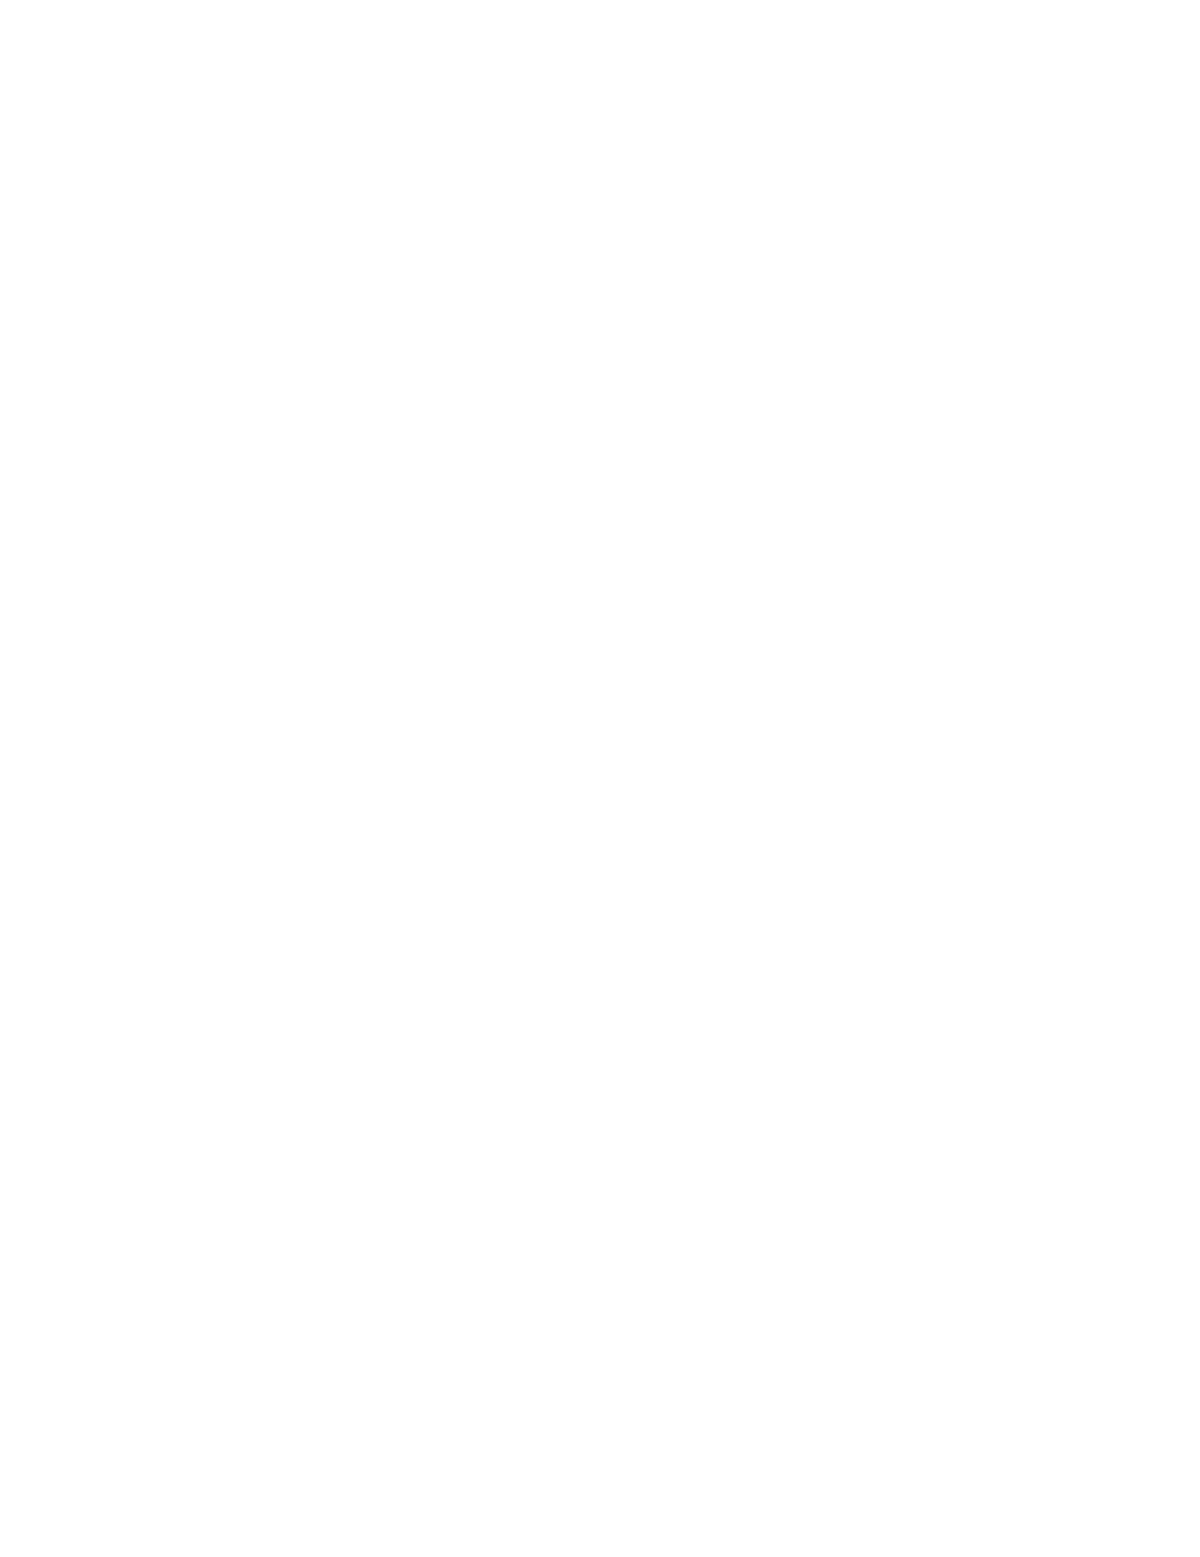 stack of books next to a cup of coffee and small ladder